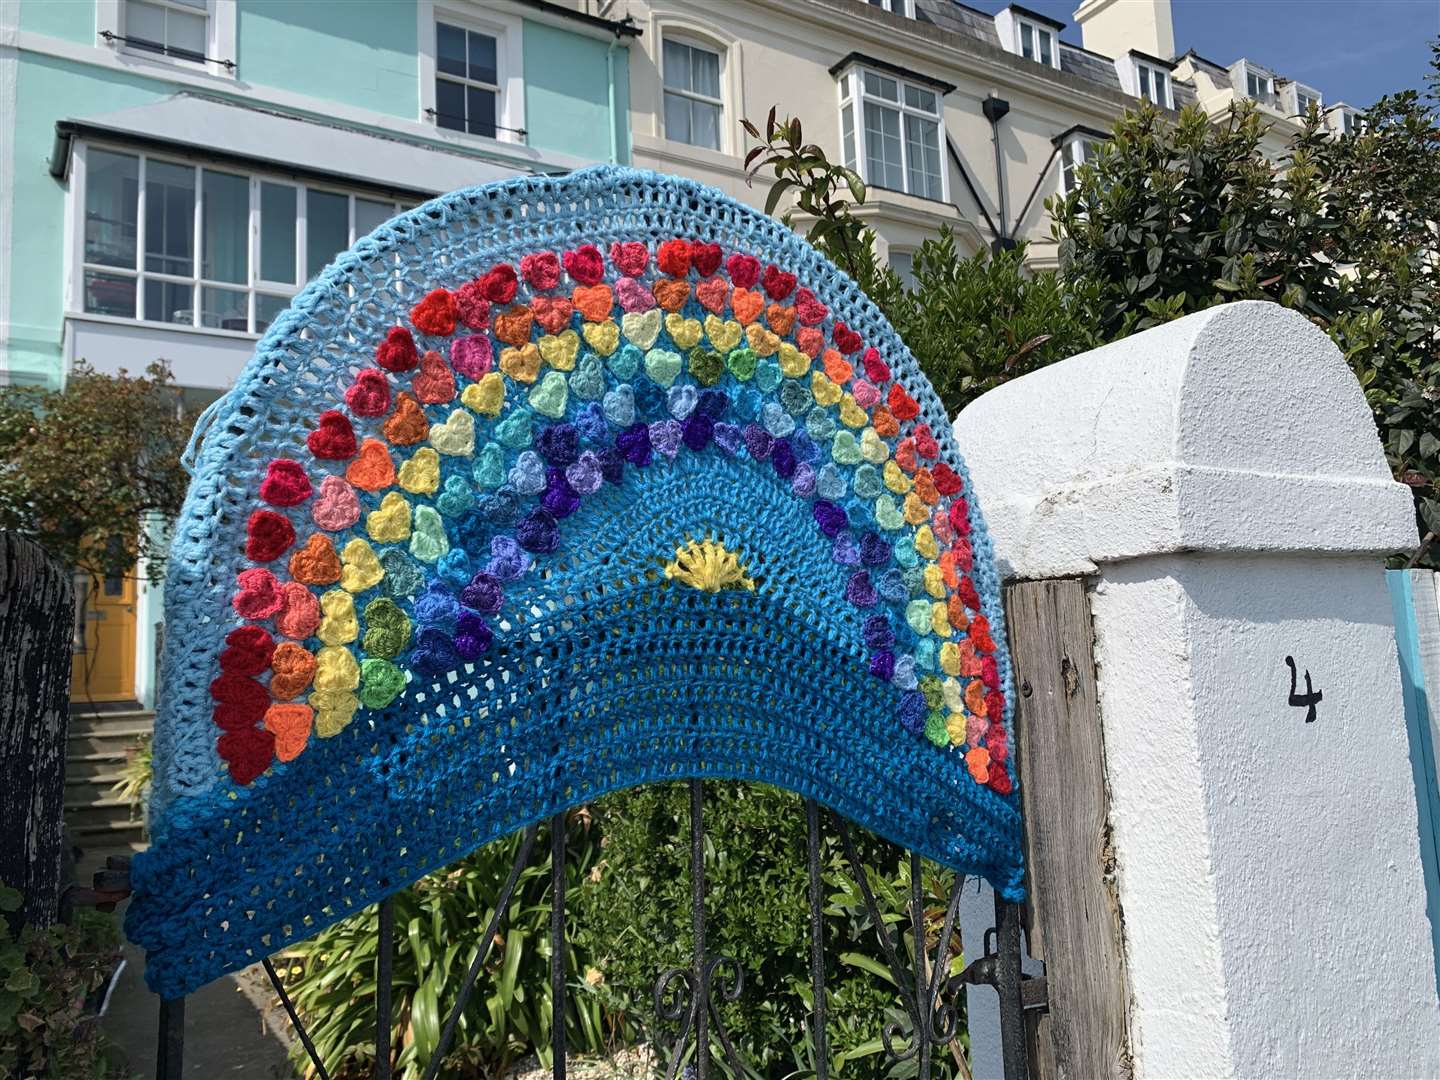 A garden gate in The Beach, just along from The Strand, has been given a makeover